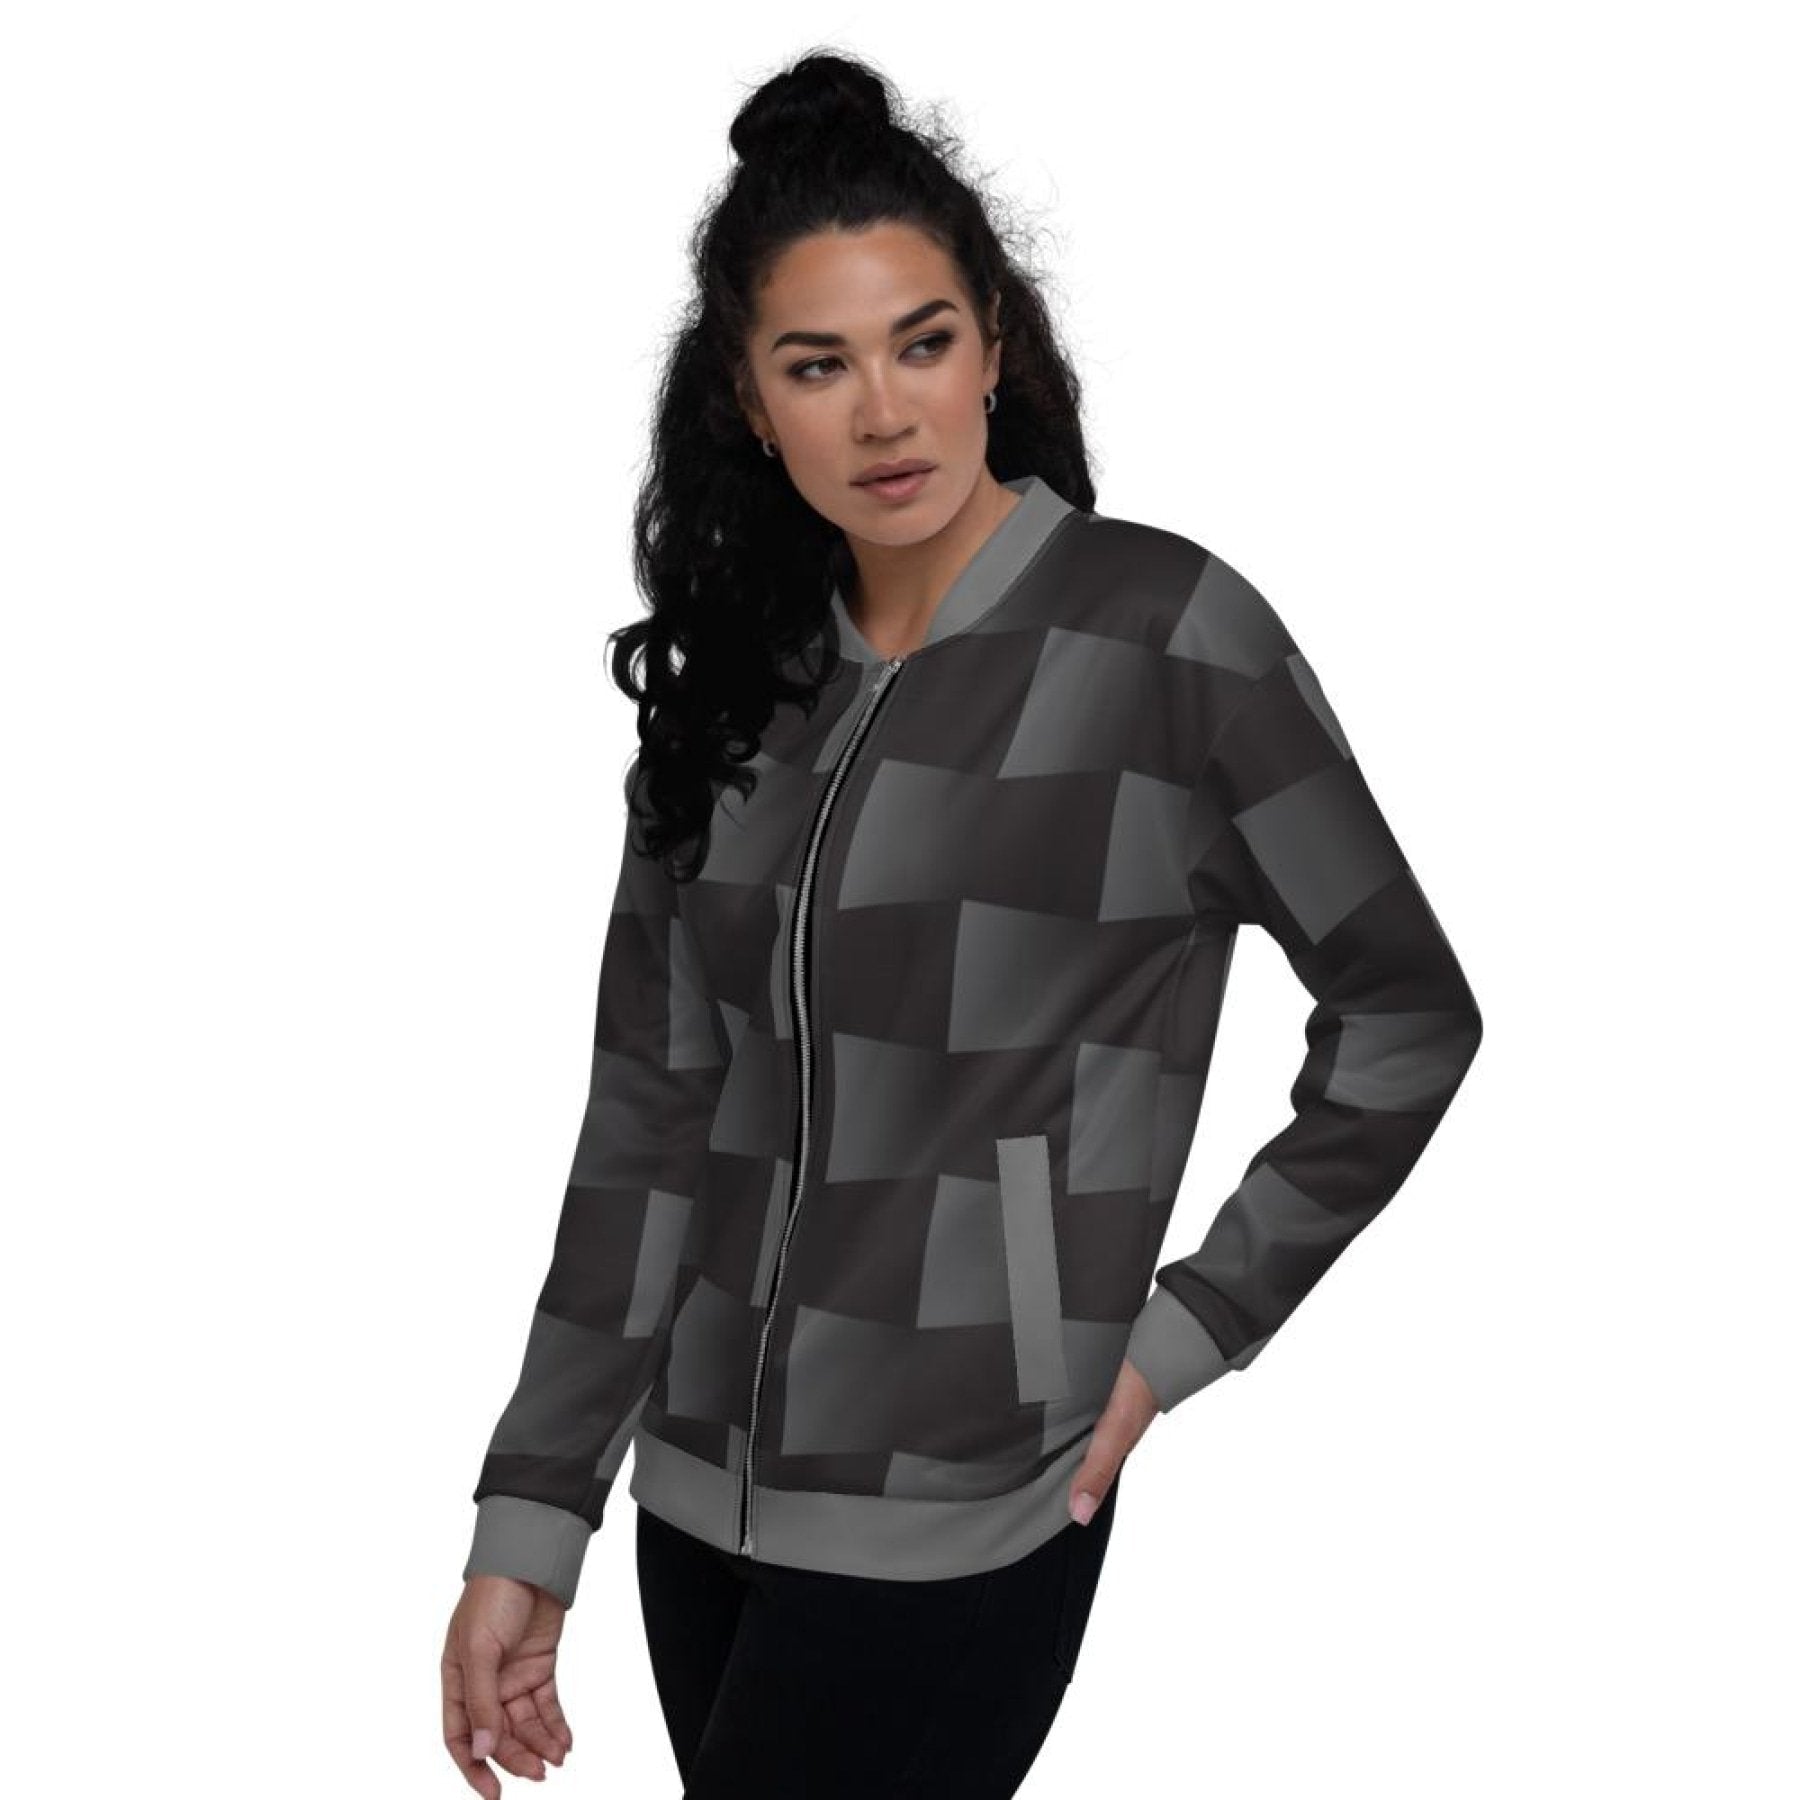 Womens Jacket - Black And Gray 3D Square Style Bomber Jacket - Scarvesnthangs